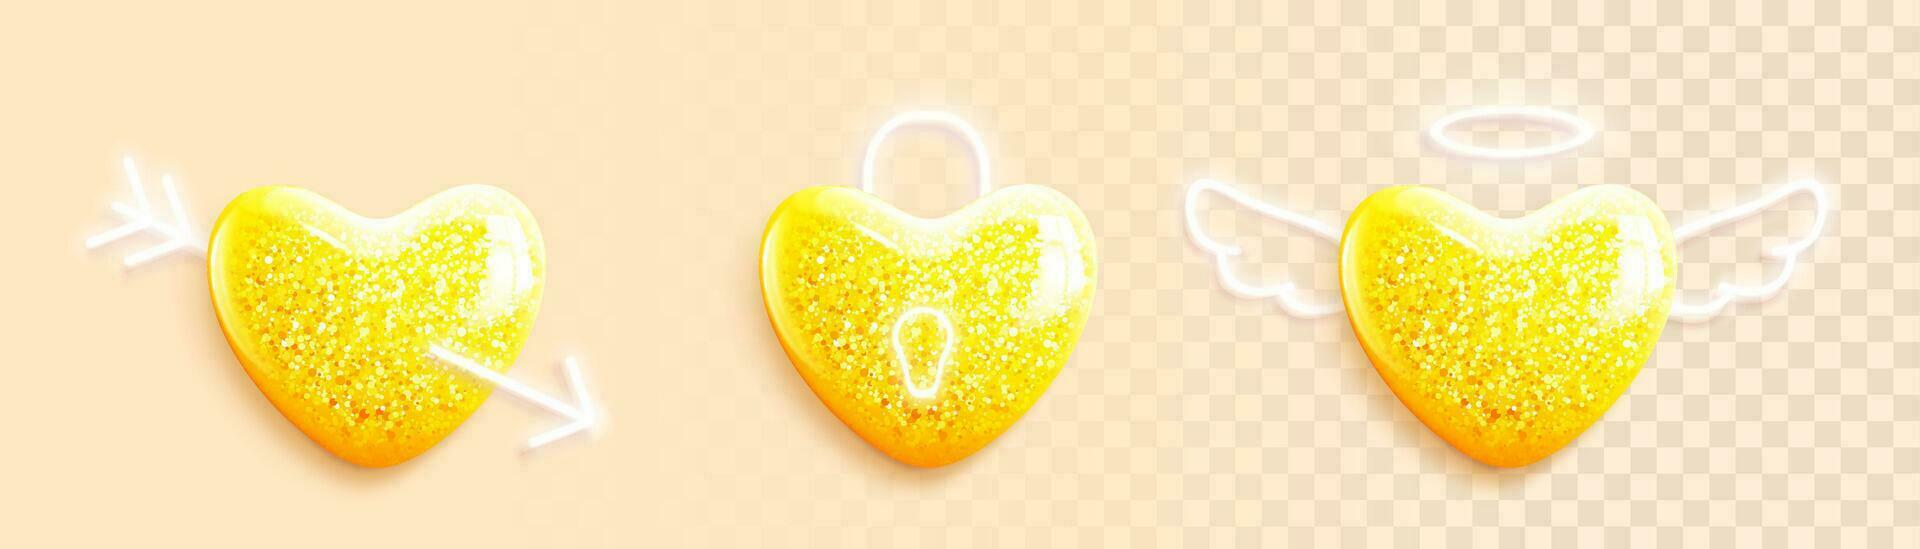 Set of glossy golden 3d heart icons with glitter. Yellow realistic hearts with white neon wings, arrow and keyhole. Love symbol for greeting cards, banners for Valentine's Day. Vector illustration